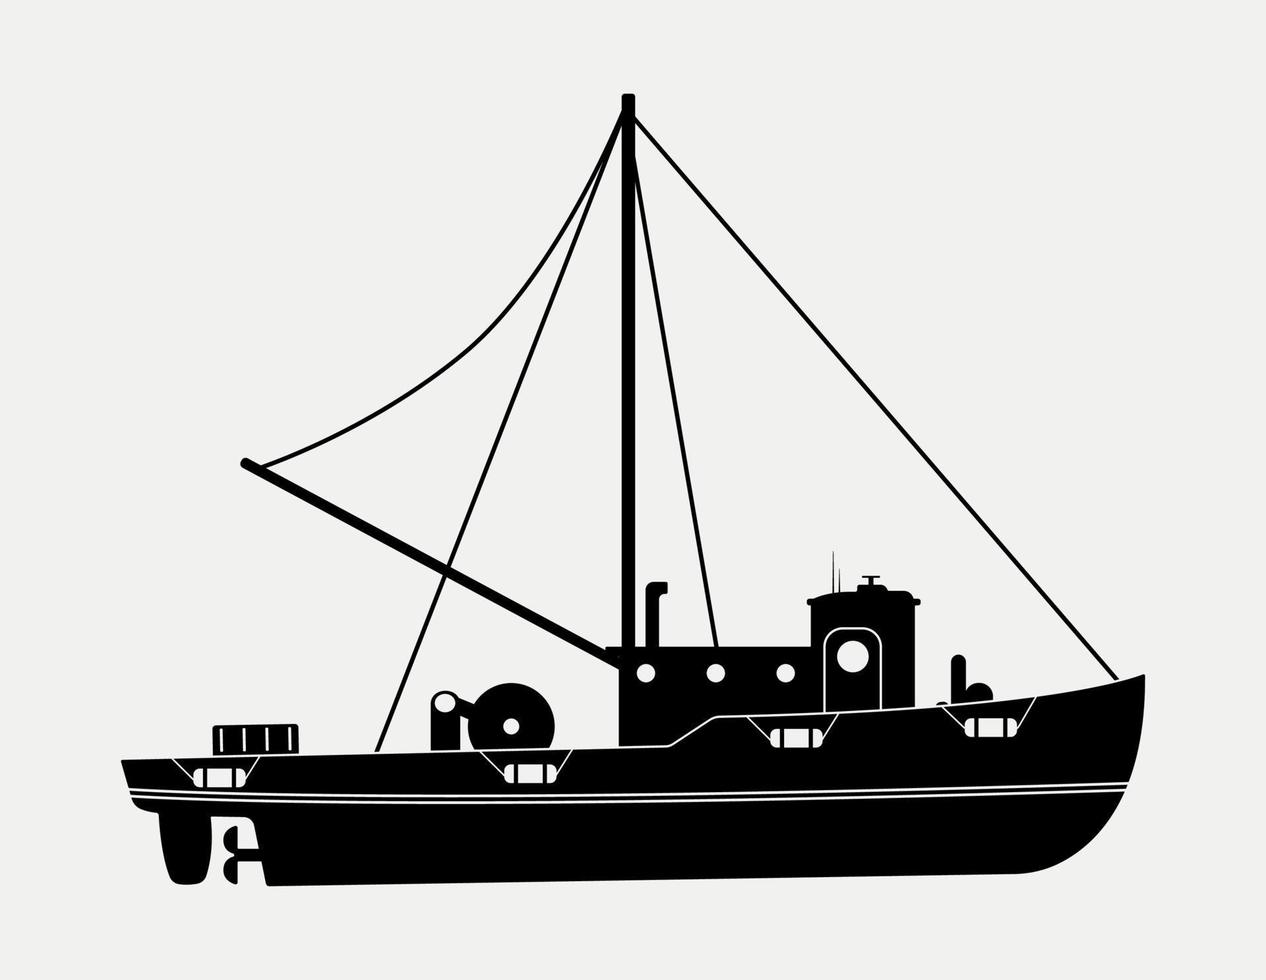 https://static.vecteezy.com/system/resources/previews/008/415/270/non_2x/fishing-boat-vessel-ship-silhouette-illustration-free-vector.jpg